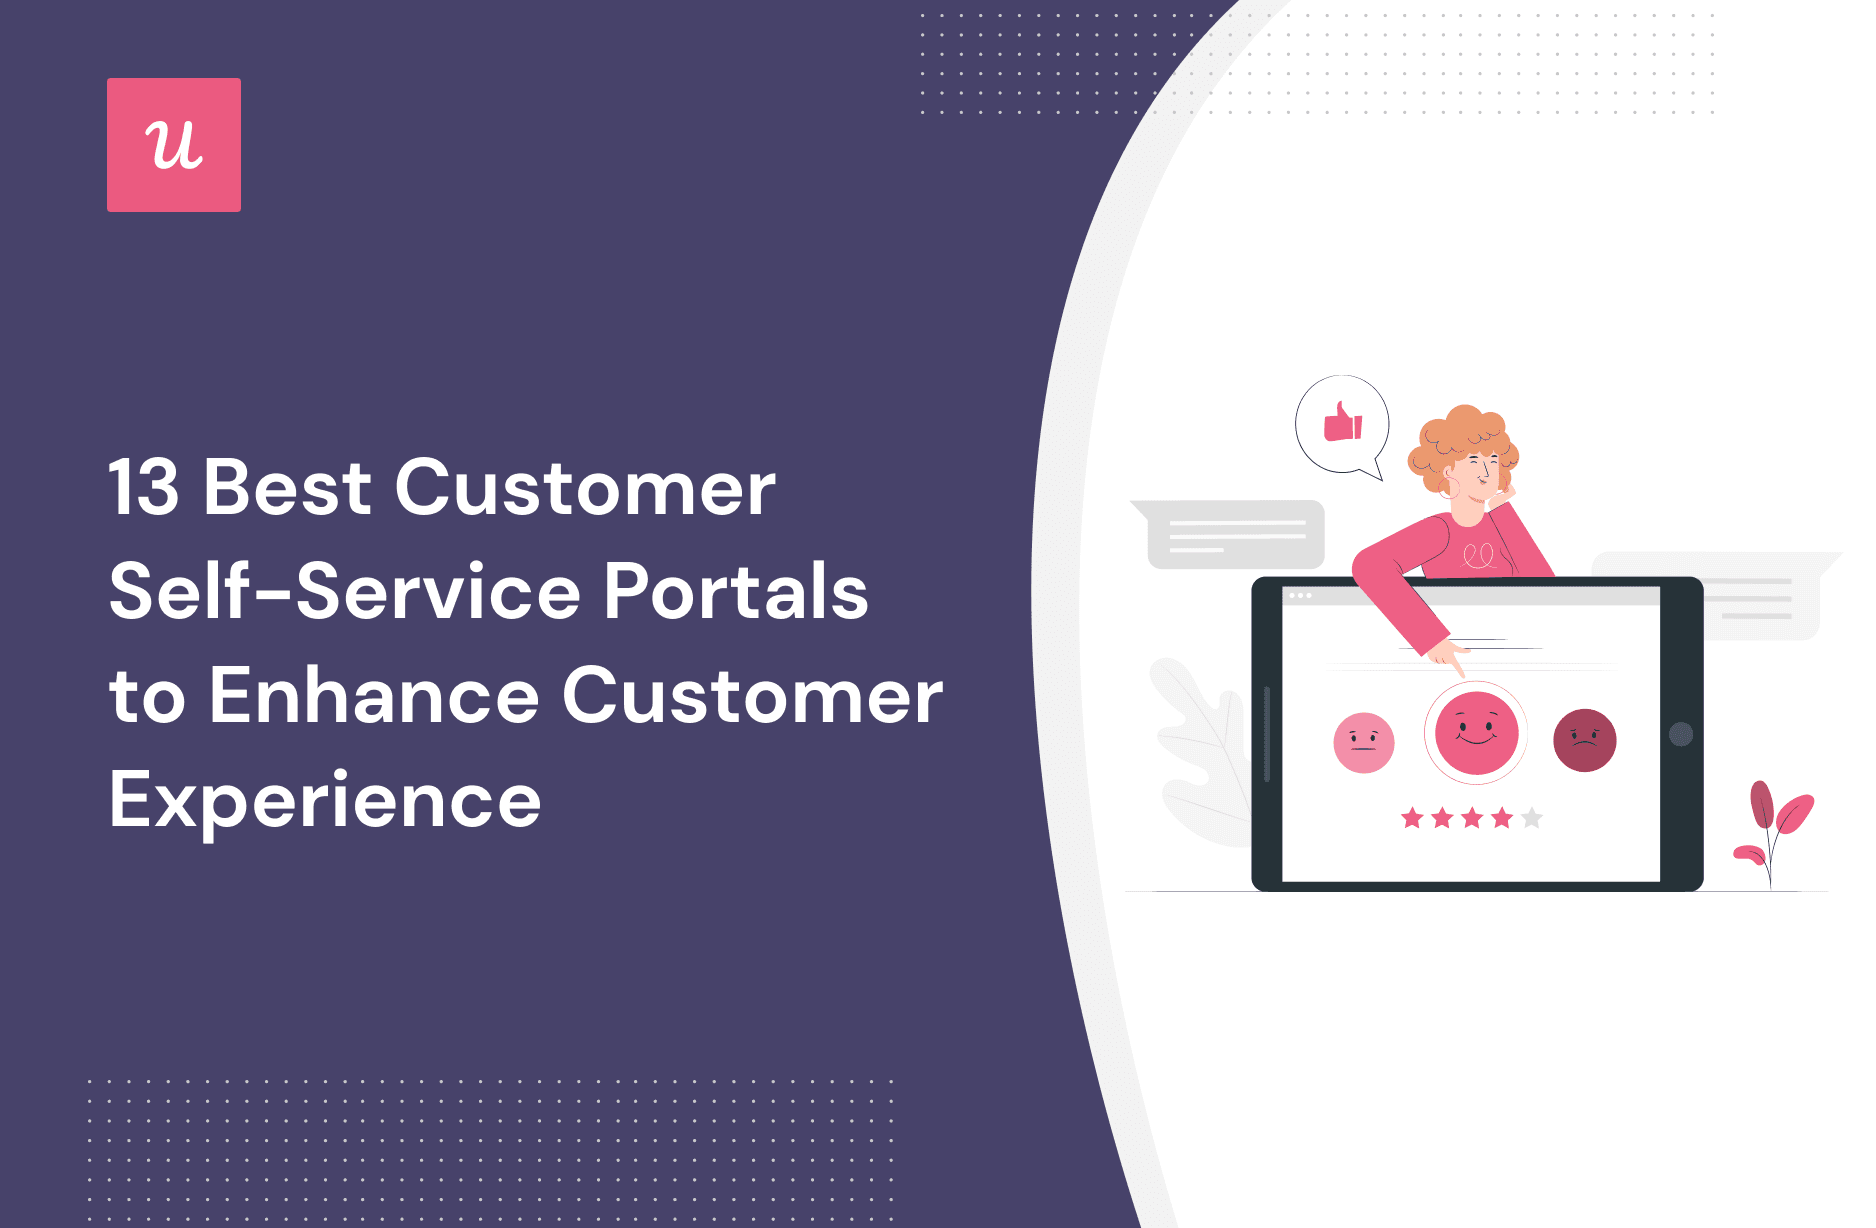 13 Best Customer Self-Service Portals to Enhance Customer Experience cover